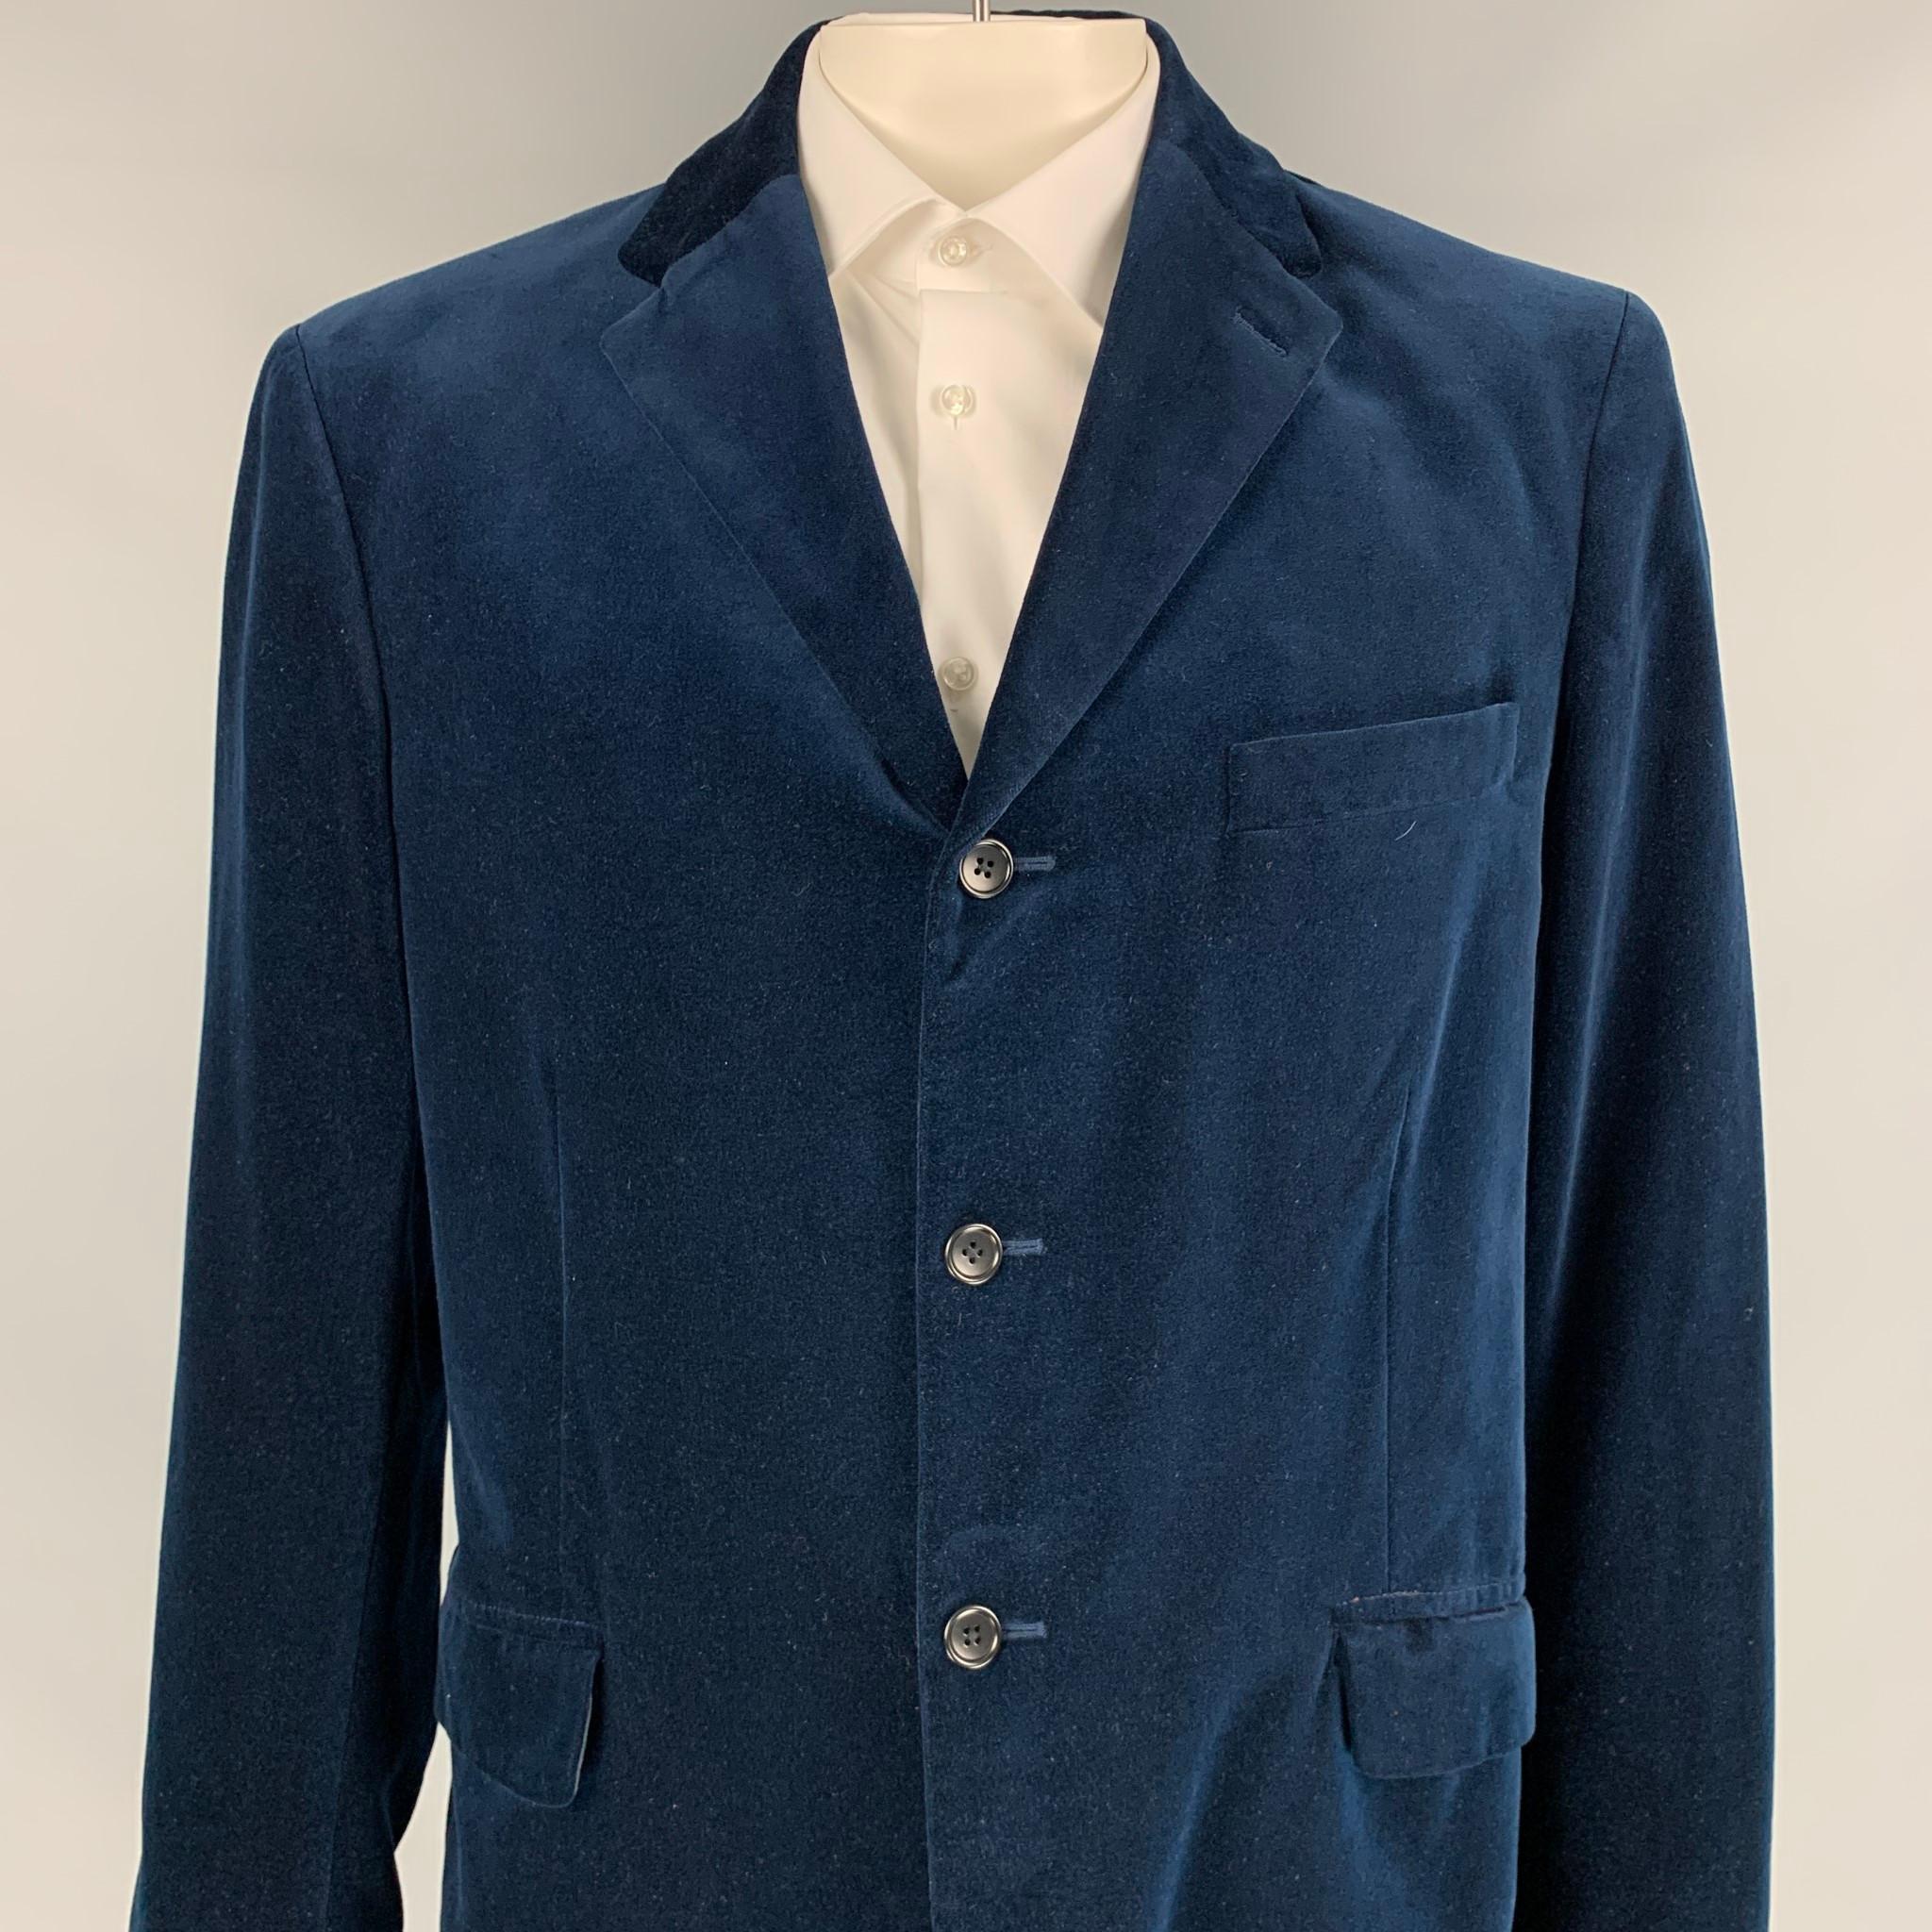 POLO by RALPH LAUREN sport coat comes in a navy cotton velvet with a full liner featuring a notch lapel, flap pockets, double back vent, and a three button closure. 

Very Good Pre-Owned Condition.
Marked: L

Measurements:

Shoulder: 19 in.
Chest: